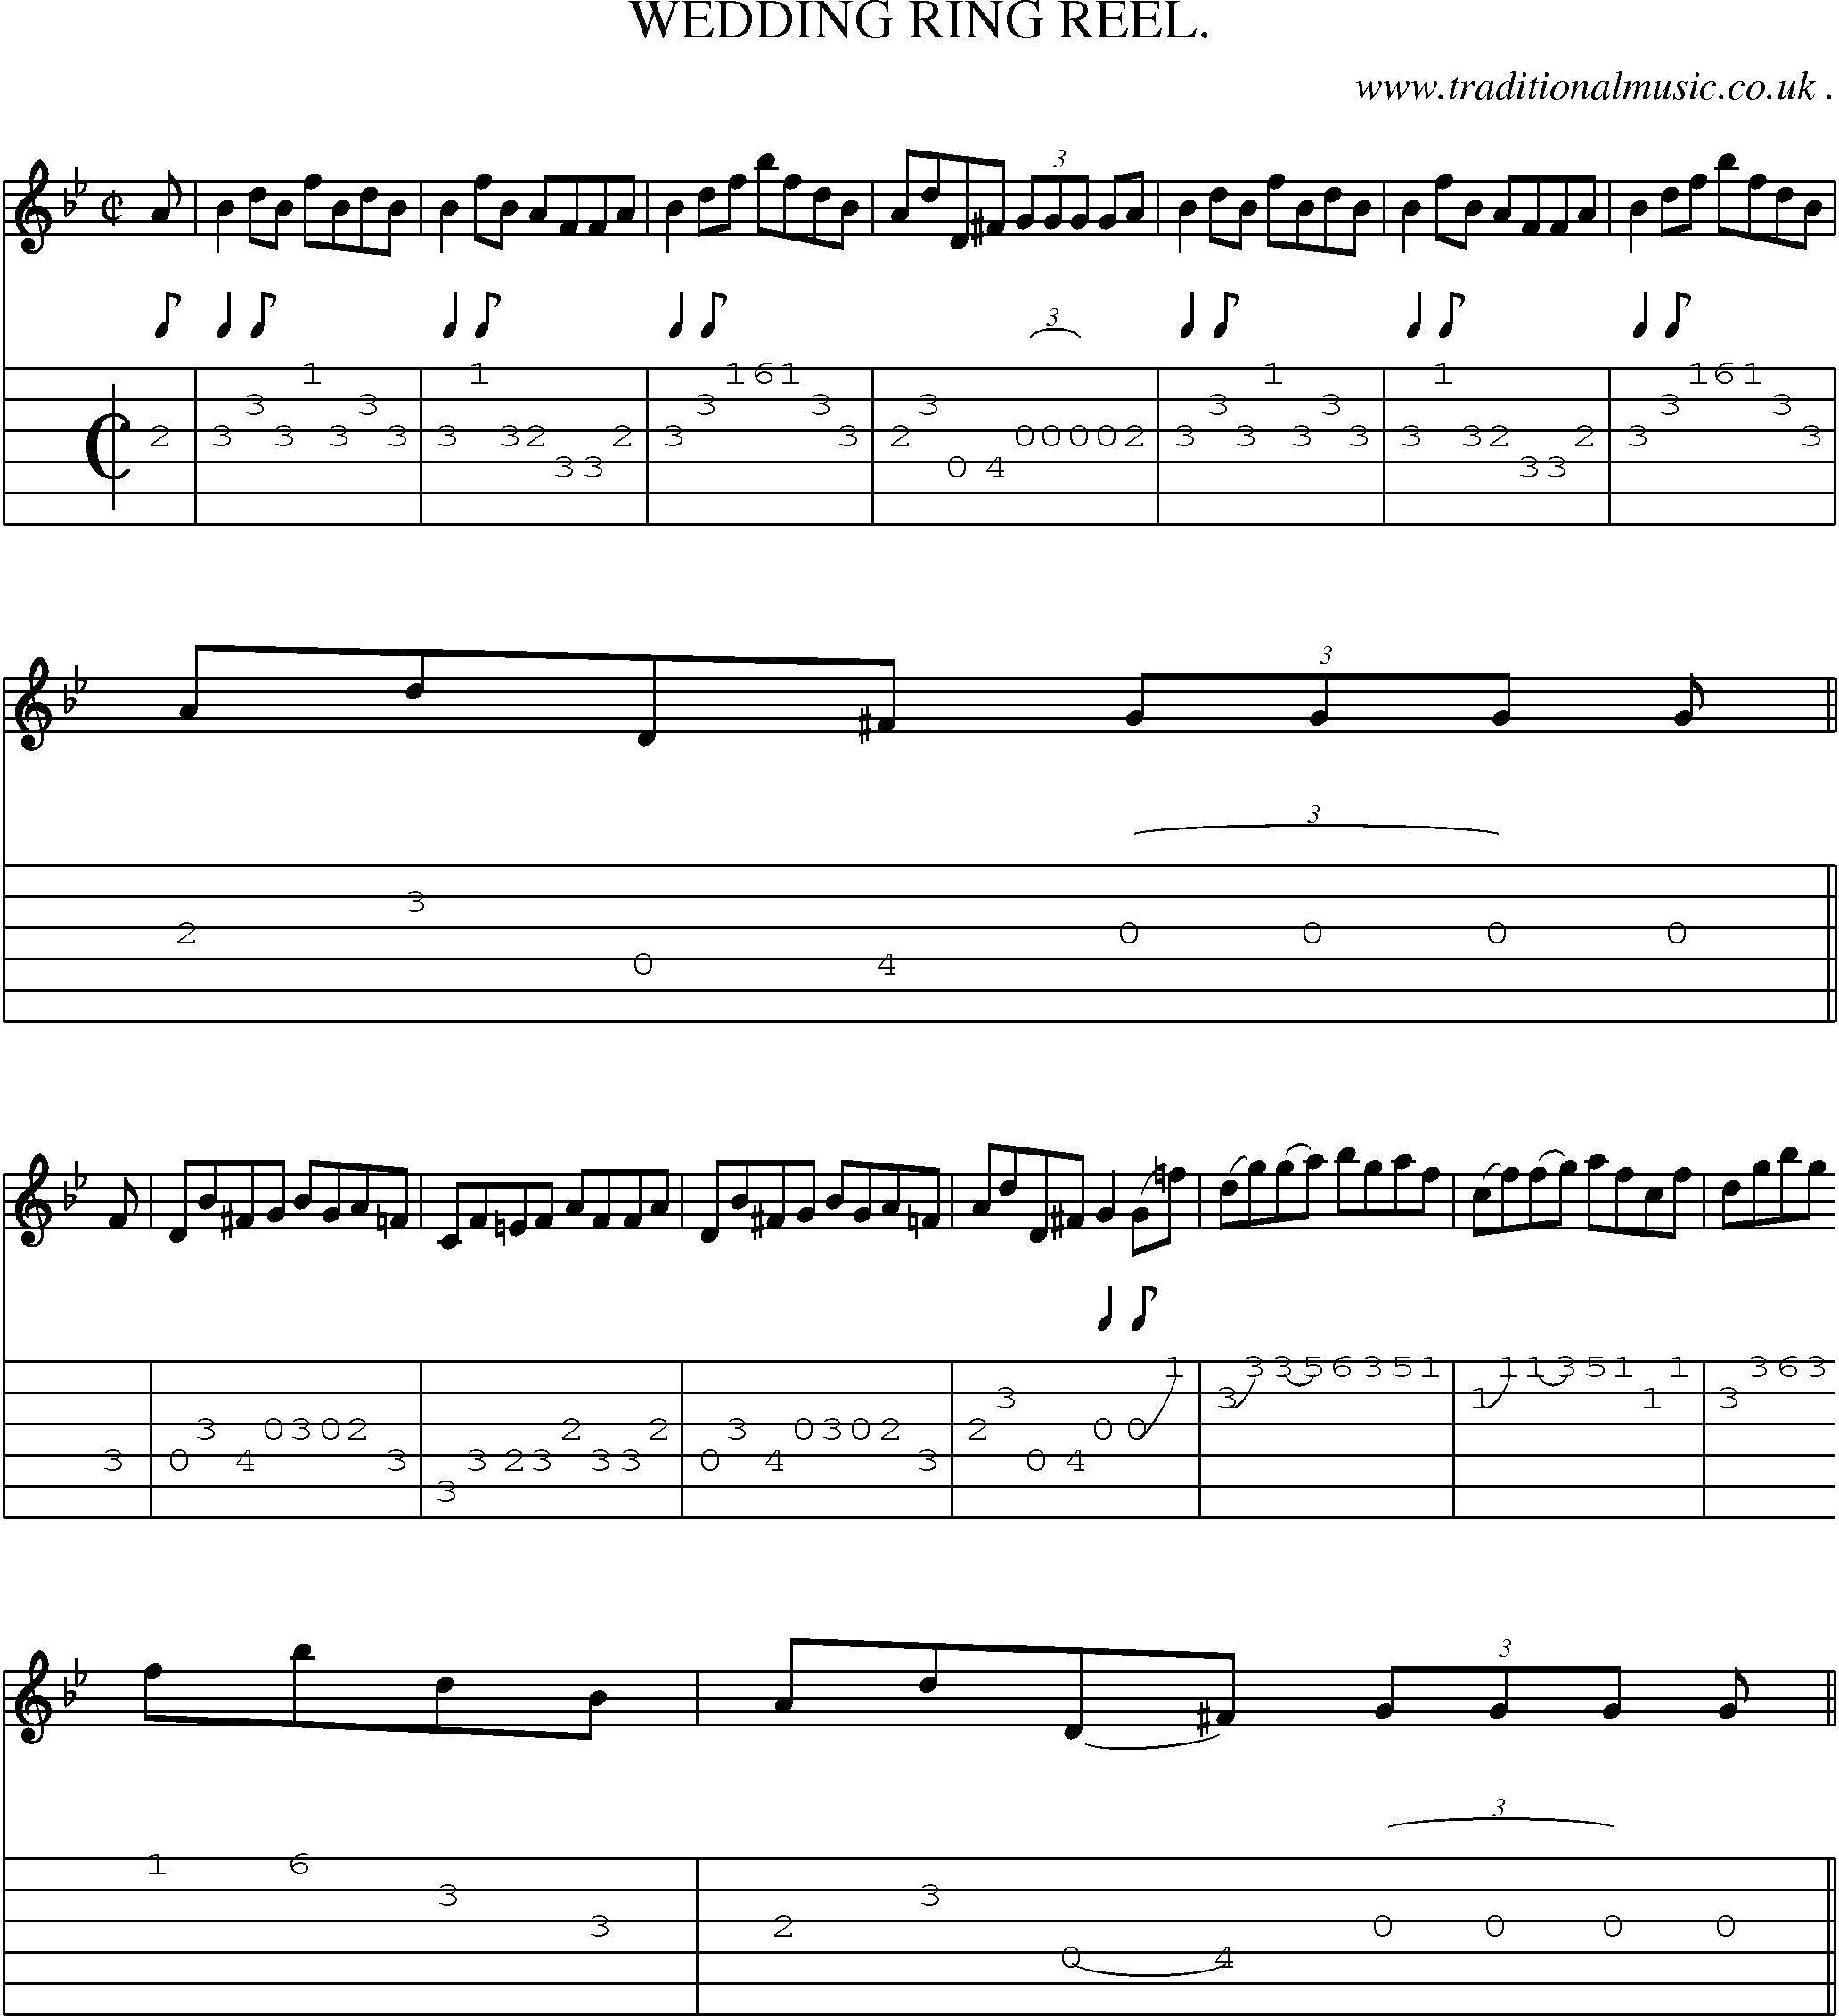 Sheet-Music and Guitar Tabs for Wedding Ring Reel